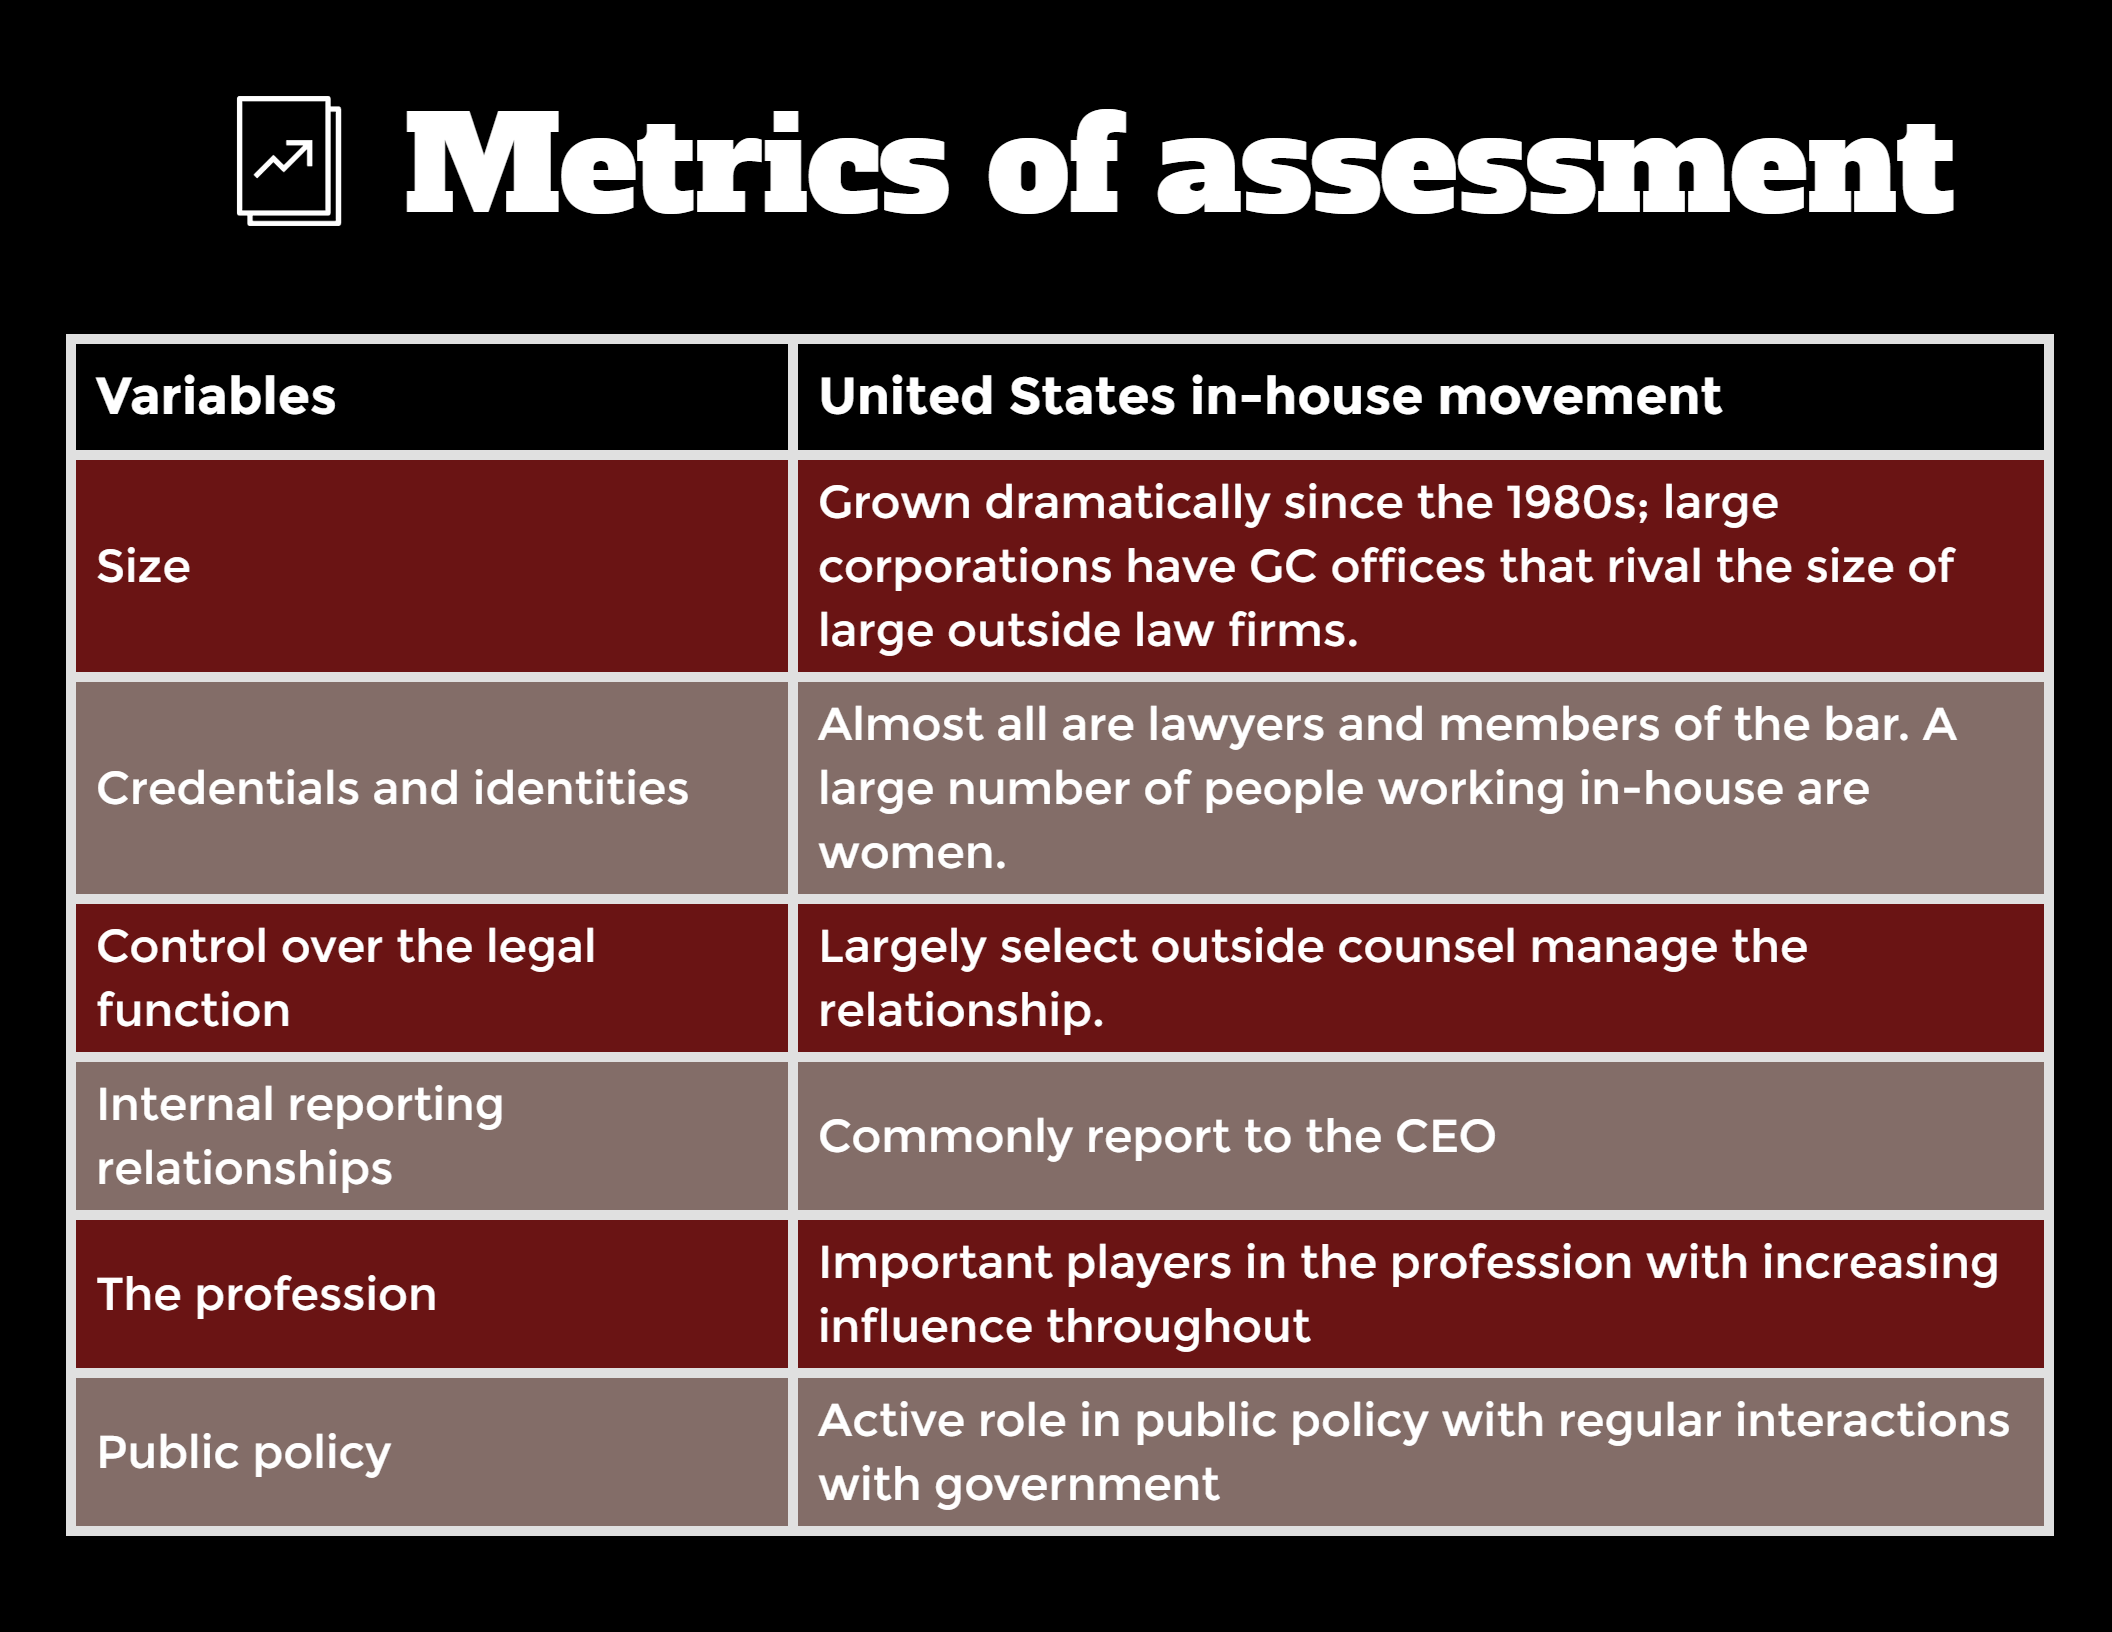 Metrics of assessment bar chart shows variables against United States in-house movement:

Variables: .S. in-house movement
size: grown dramatically since the 1980s; large corporations  have GC offices that rival the size of large outside law firms

Credentials and identities: almost all are lawyers and members of the bar. A large number of people working in-house are women.

Control over the legal function: Largely select outside counsel manage the relatinship.

Internal reporting relationships: commonly report to the CEO

The profession: Important players in the profession with increasing influence throughout

Public policy: active role in public policy with regular interactions with government 